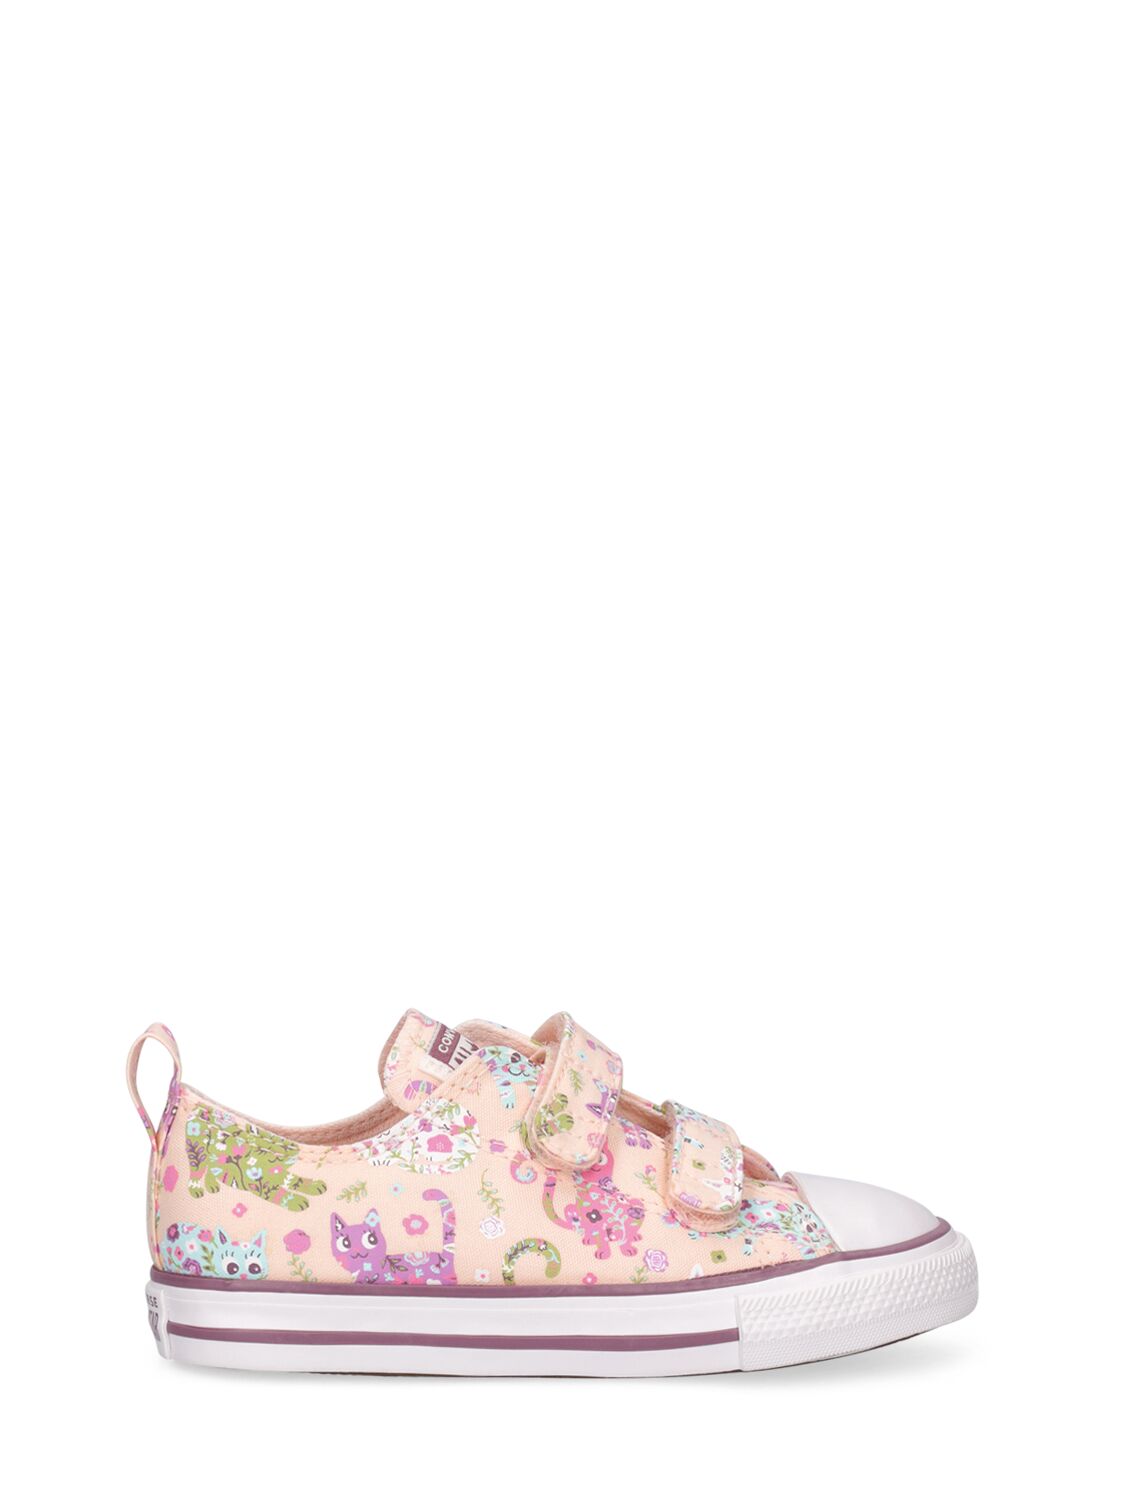 Image of Cat Print Chuck Taylor Canvas Sneakers